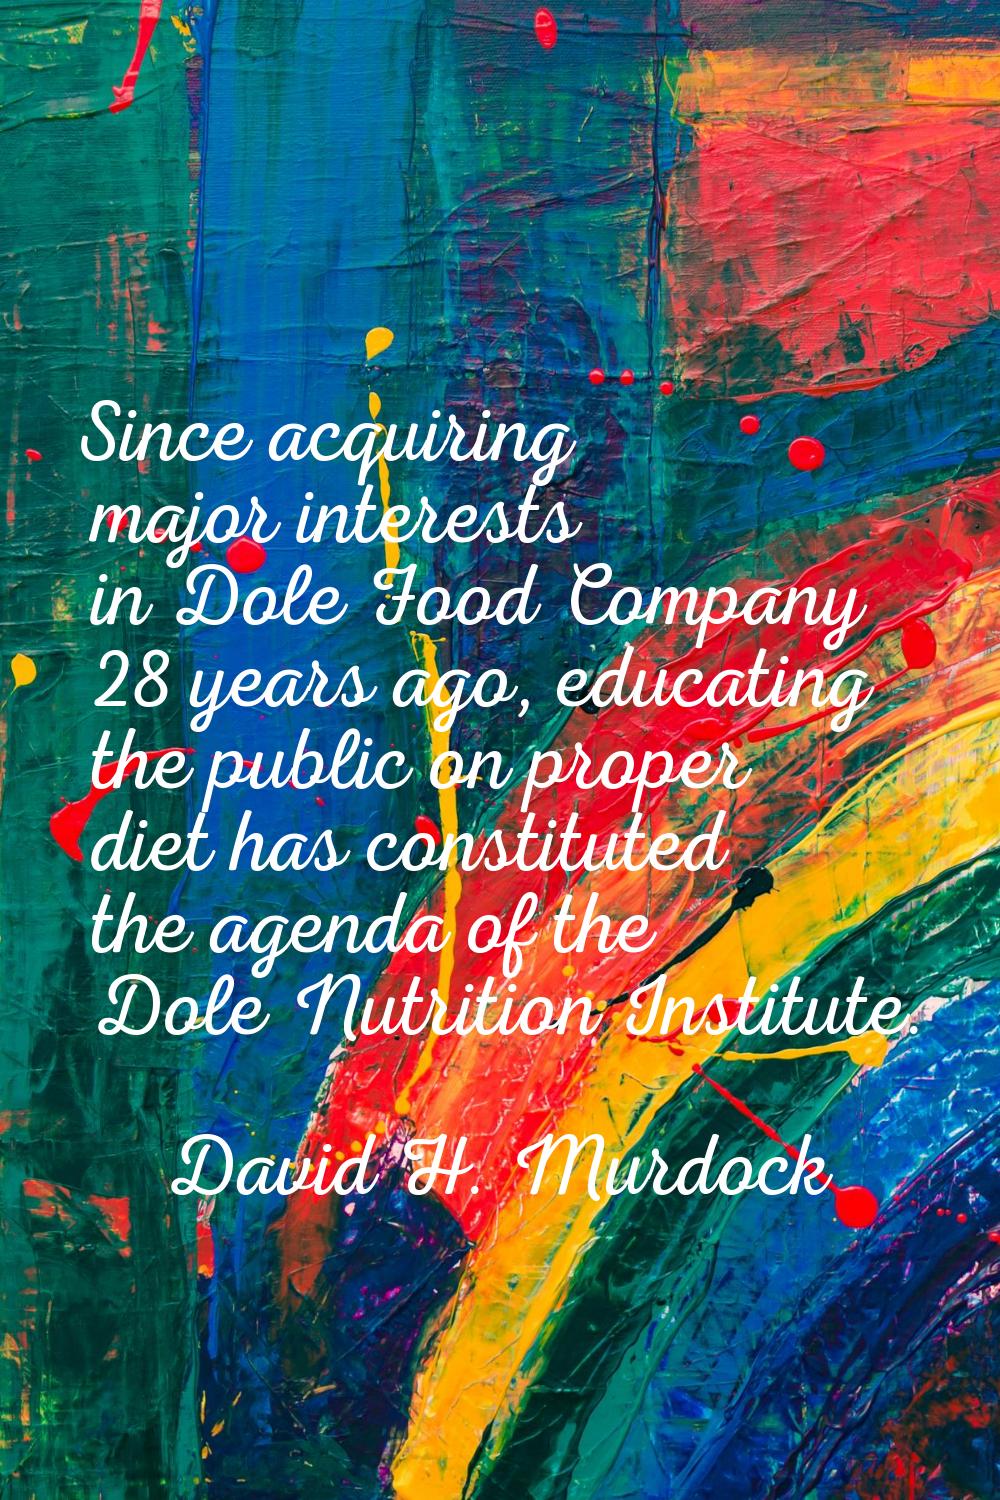 Since acquiring major interests in Dole Food Company 28 years ago, educating the public on proper d